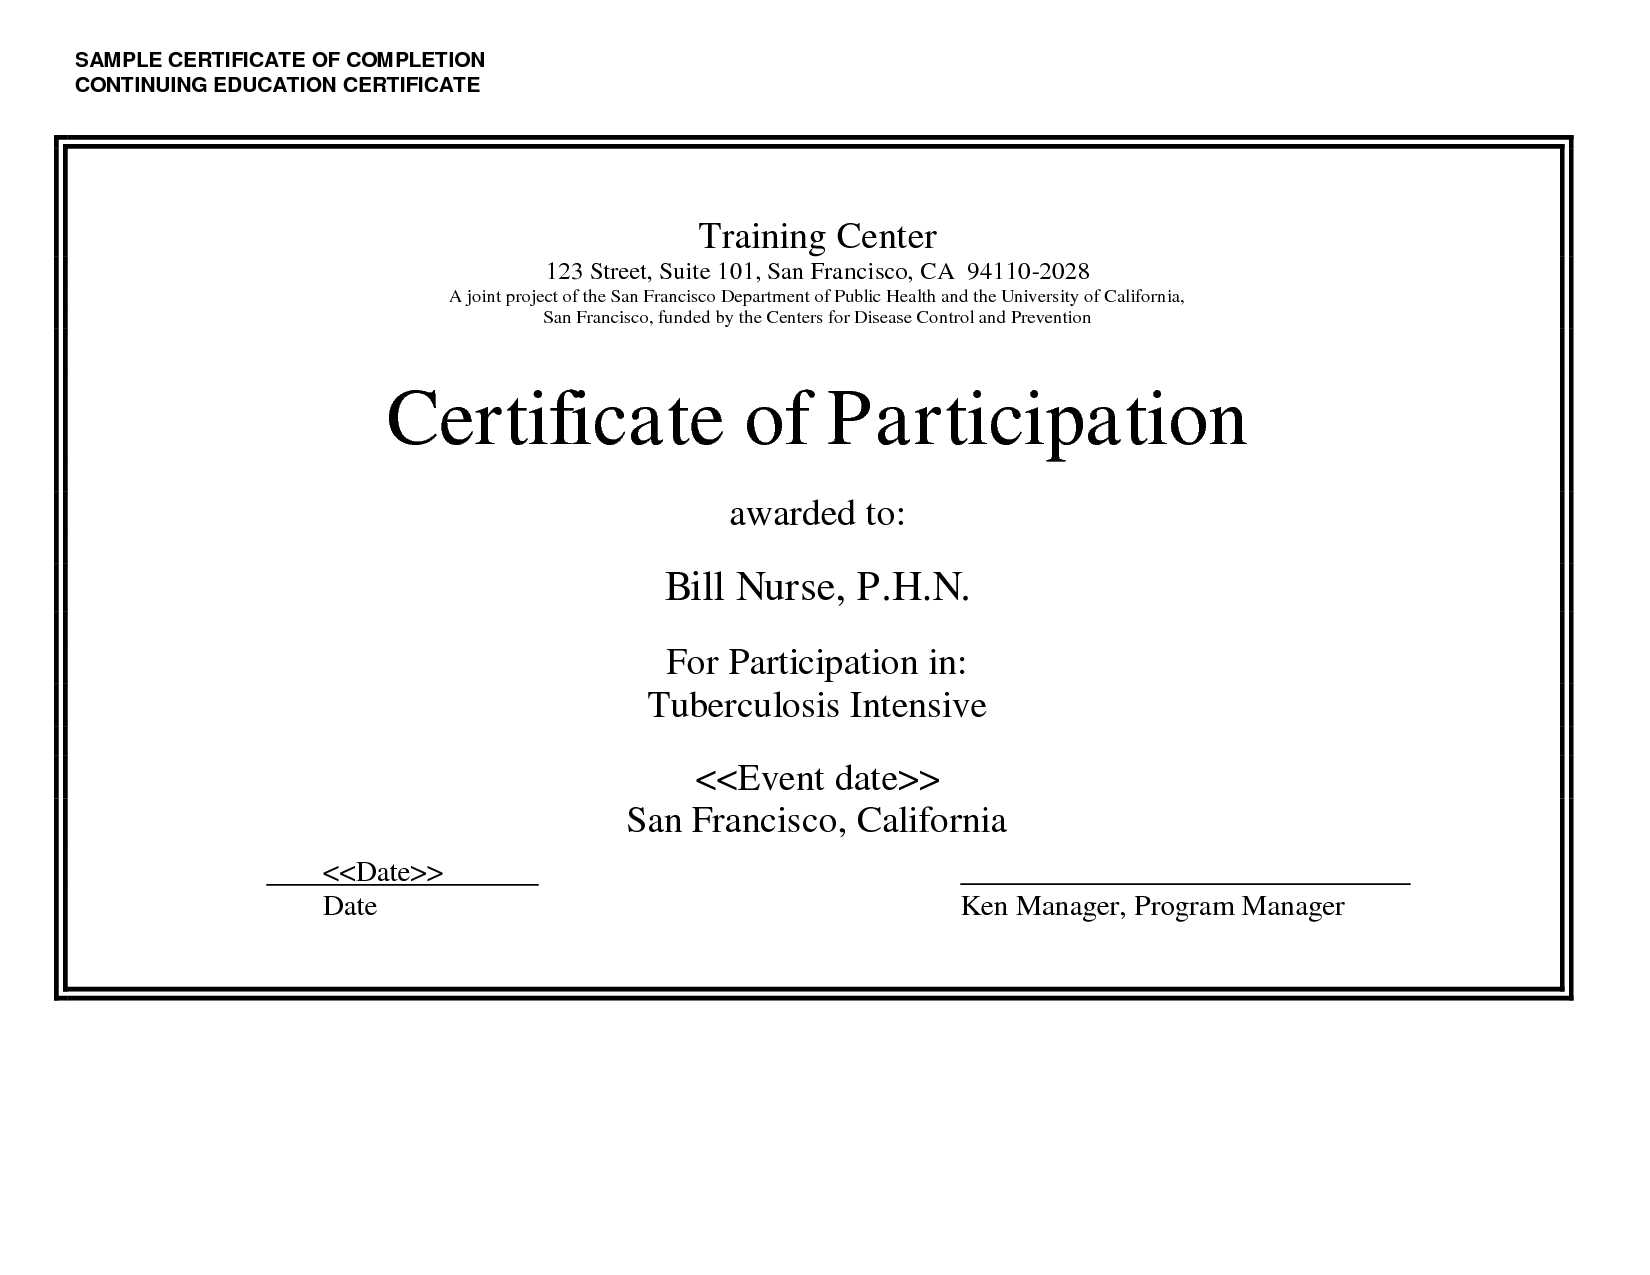 Sample Certificate Of Completion Continuing Education For Continuing Education Certificate Template